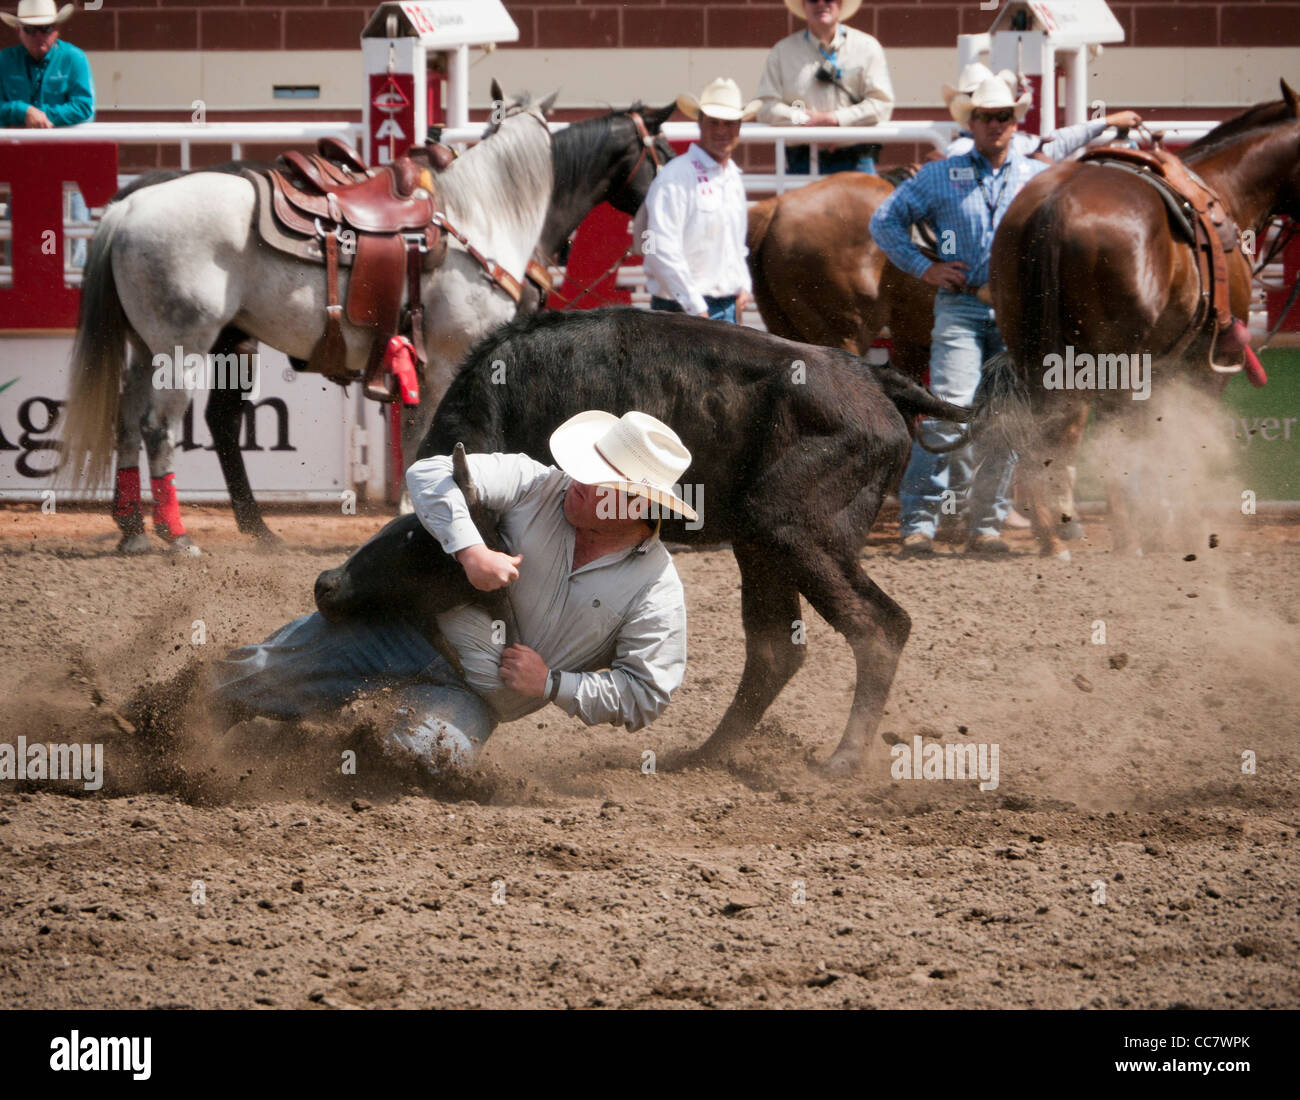 Steer wrestling at the Calgary Stampede Rodeo in Calgary Canada Stock Photo